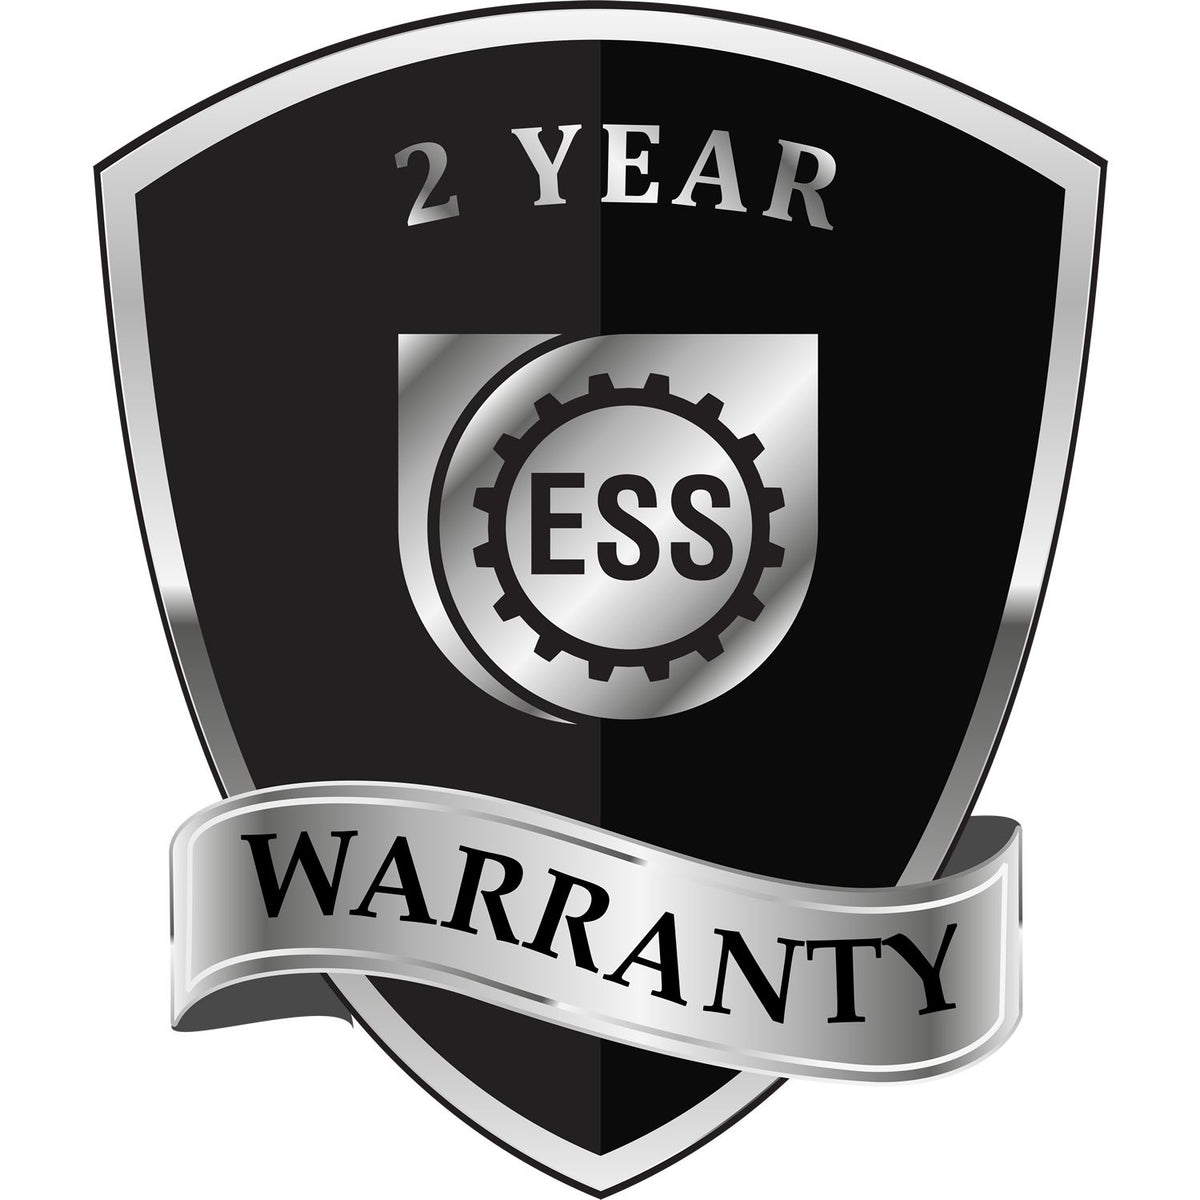 A badge or emblem showing a warranty icon for the Heavy Duty Cast Iron Virginia Engineer Seal Embosser